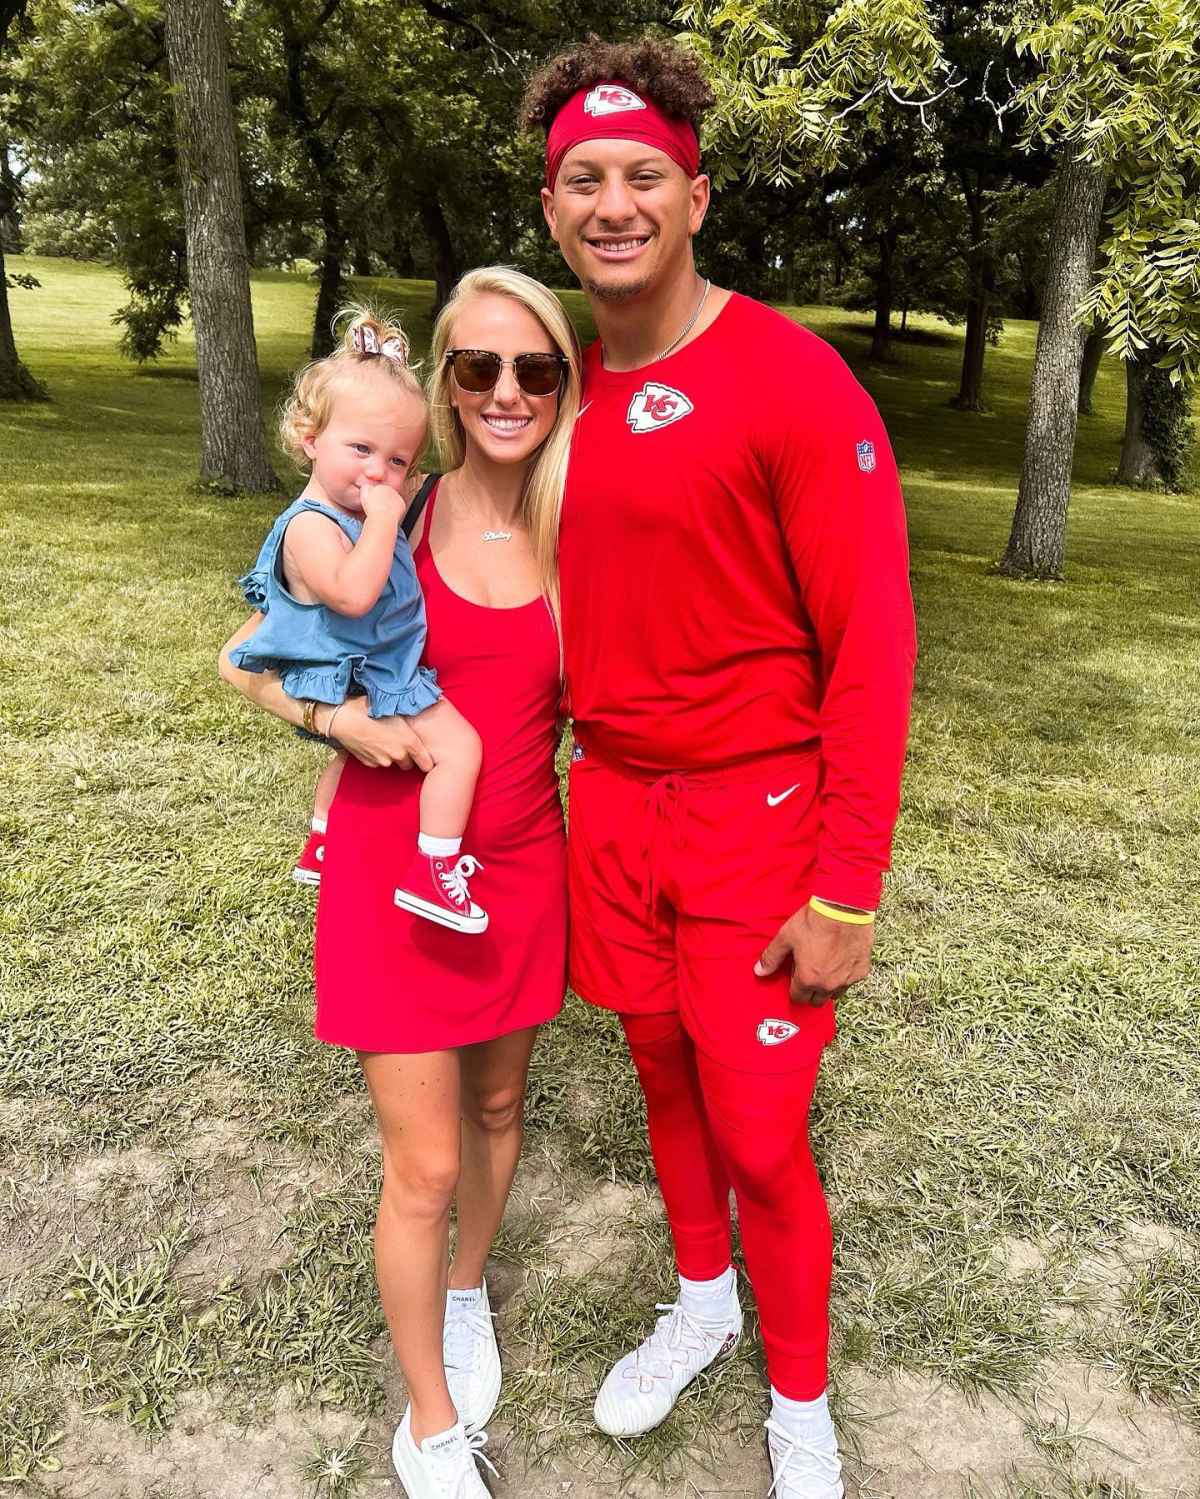 Patrick Mahomes, wife Brittany Matthews welcome second child